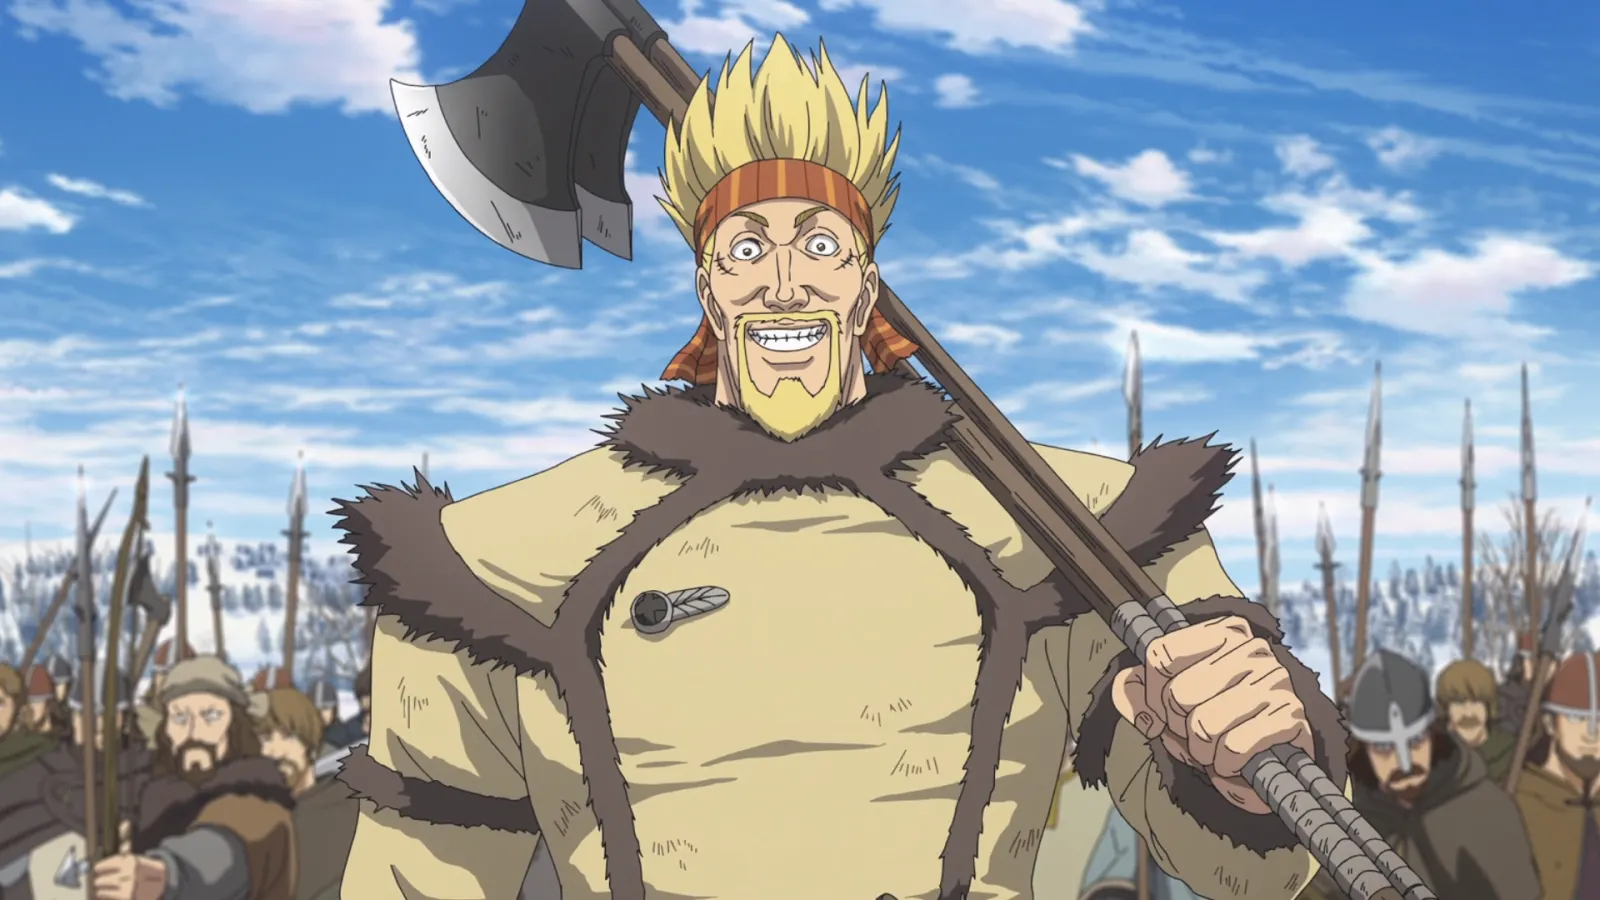 Massive psycho Thorkell is based on a real historical figure, though he probably wasn’t ten feet tall.